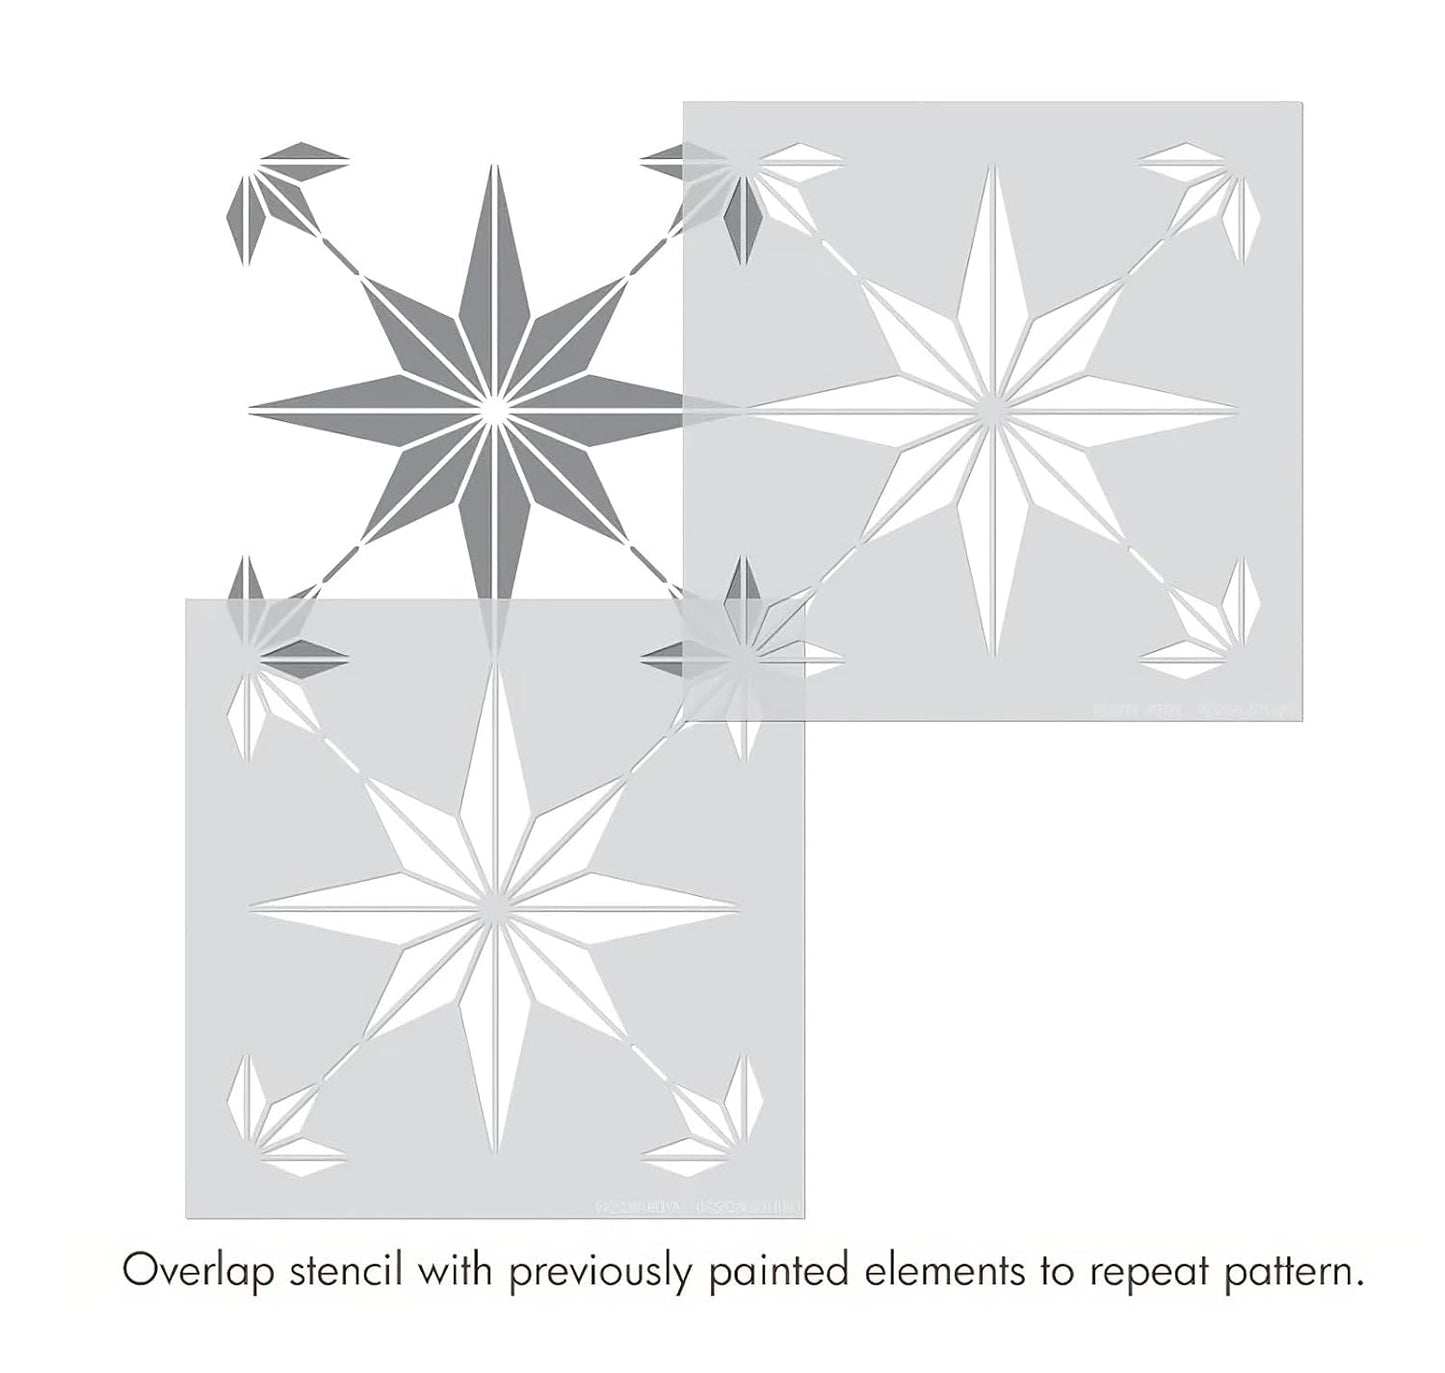 Latest A Star Design Stencils for Wall Painting - Pack of 2, Sheet Size 12 x 12 inch/Design for Wall Painting 10 x 10 inch - Small